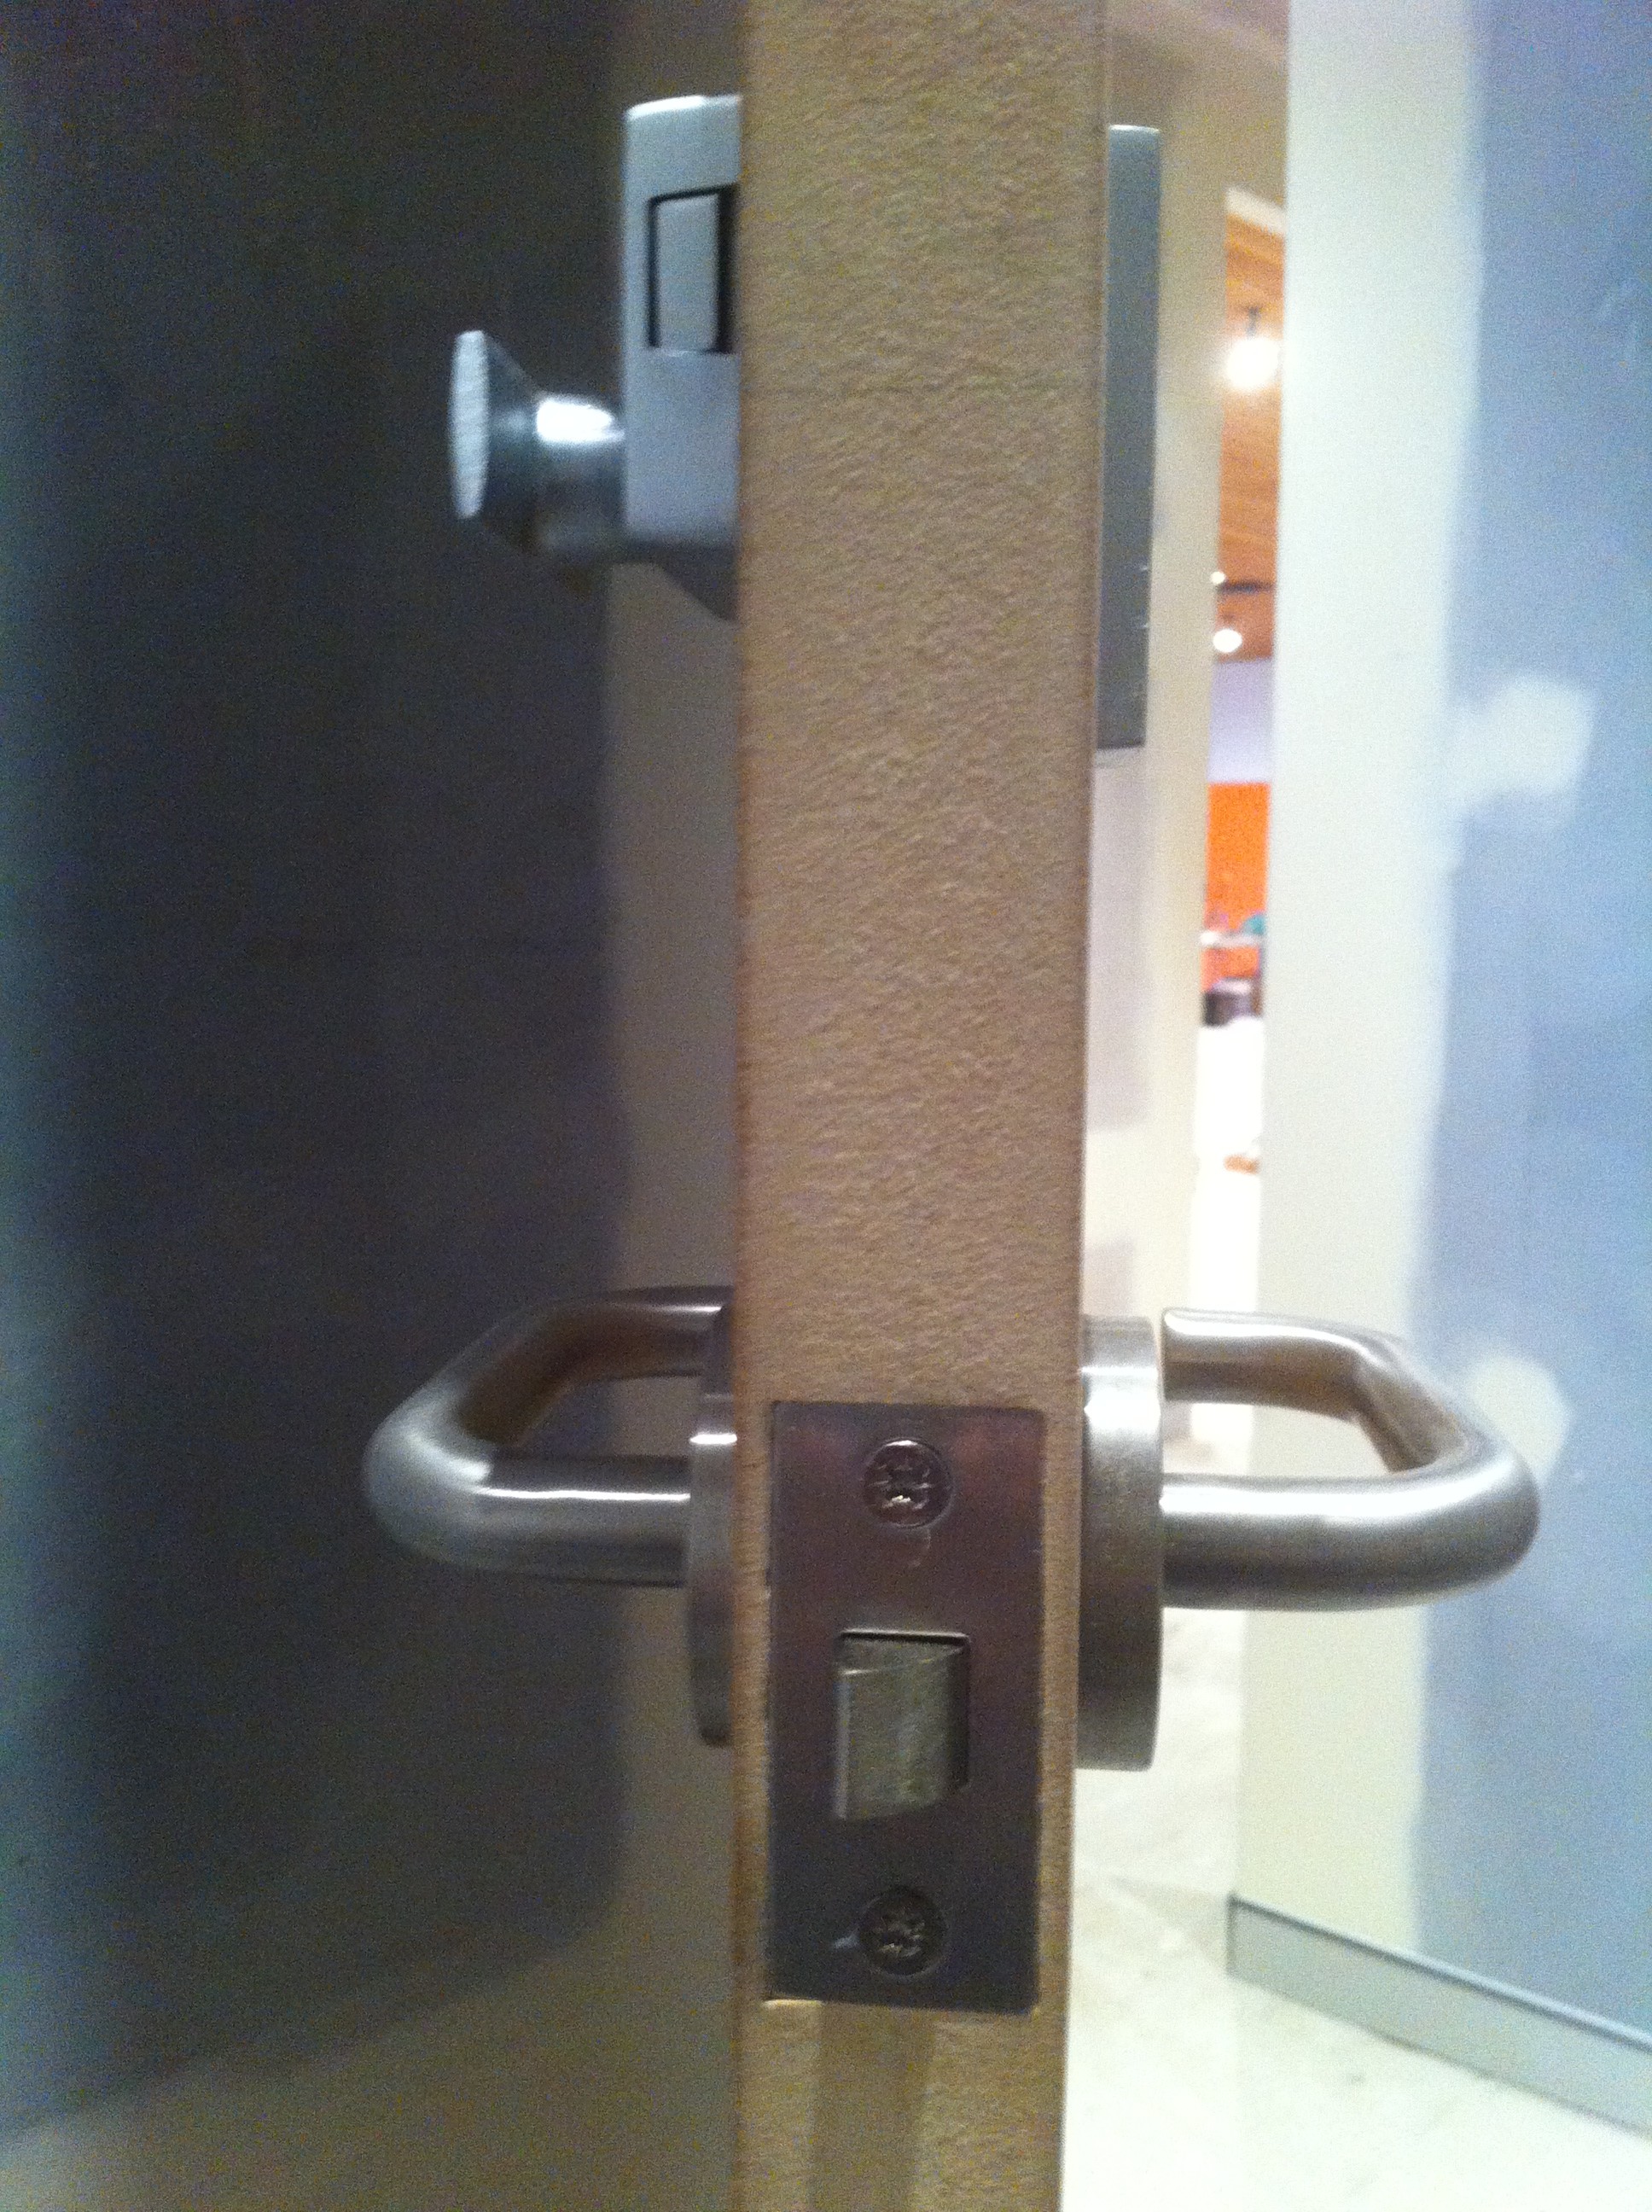 4a - Indicator Bolt _ Lever Lock Fitted to MDF Door